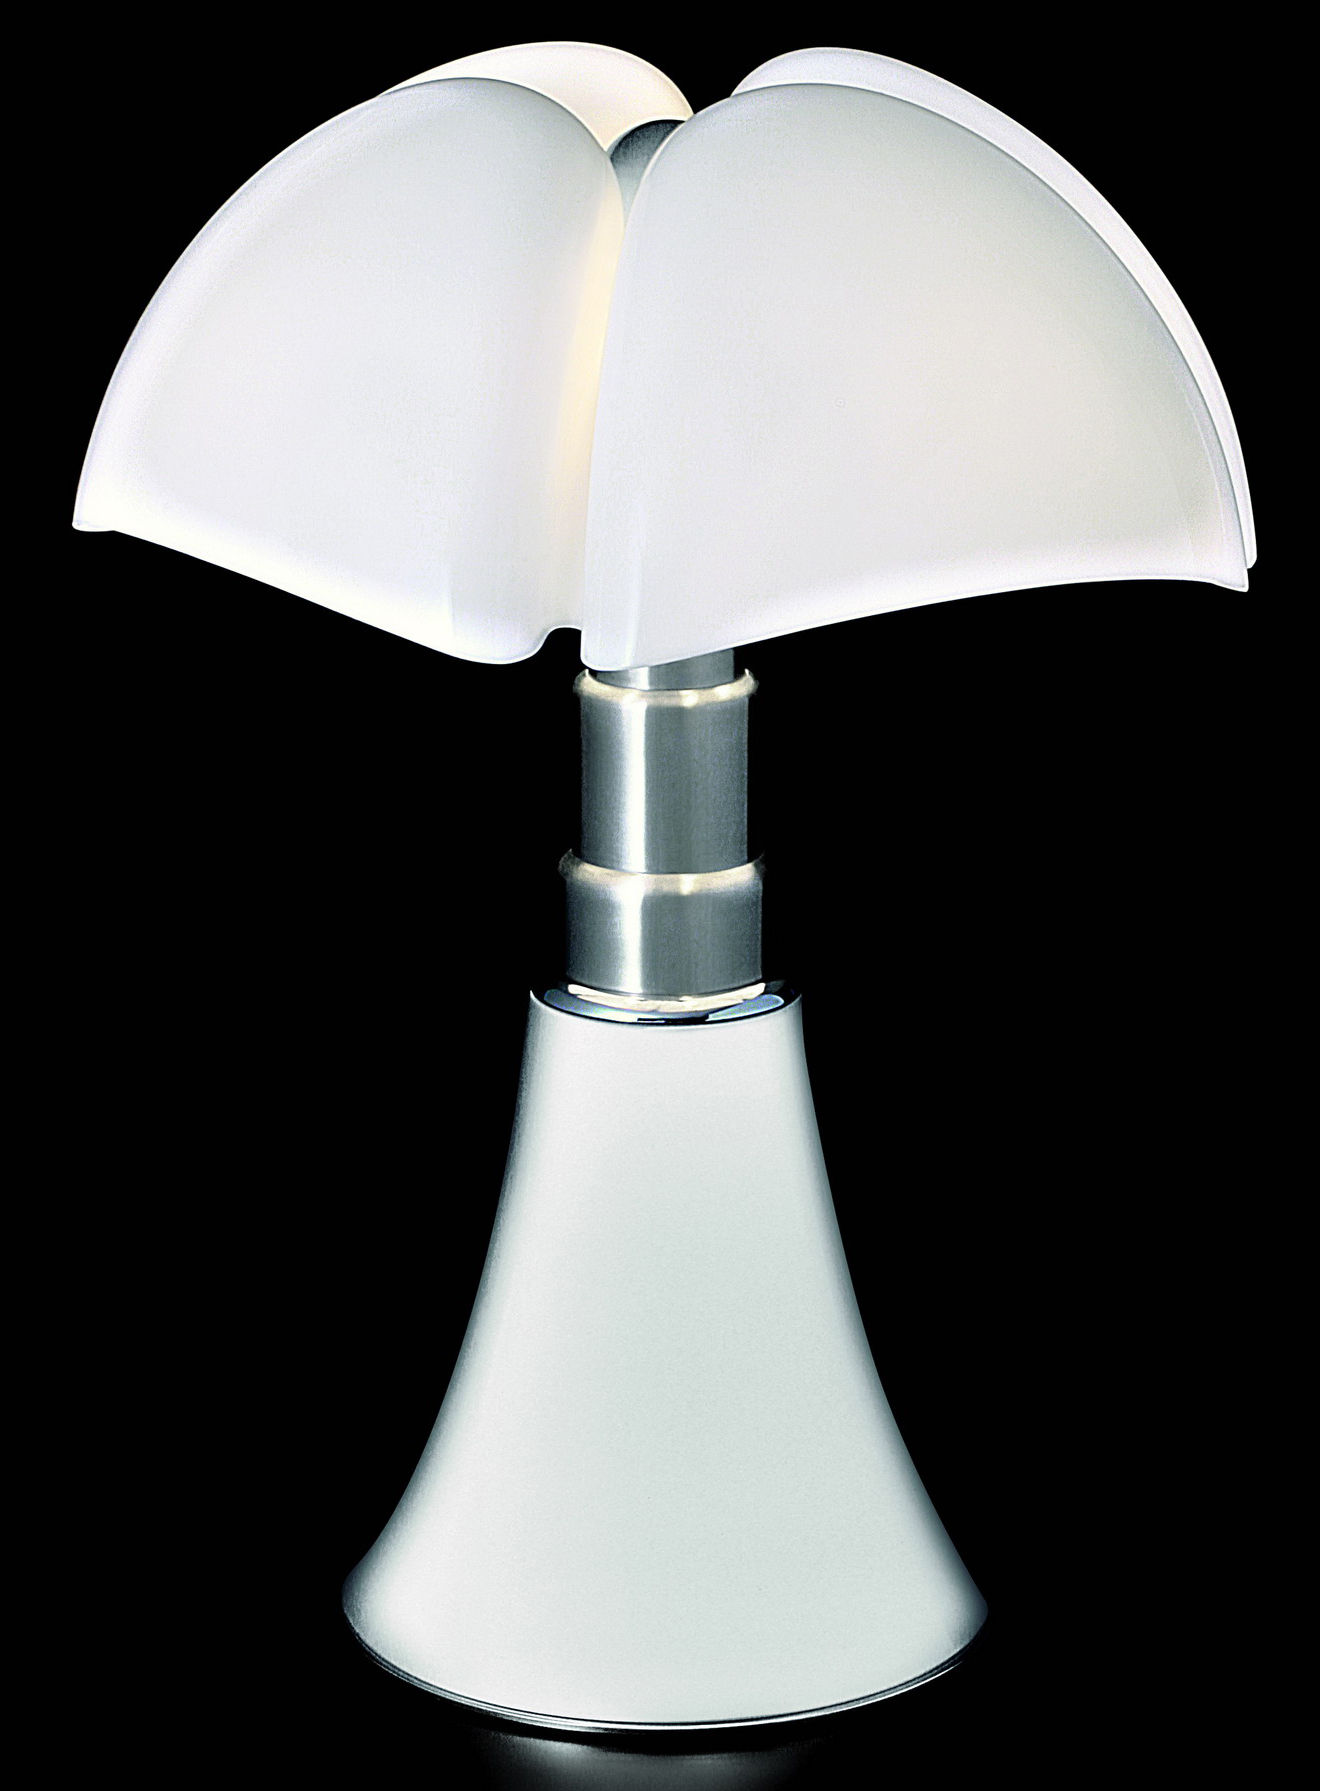 Pipistrello Table Lamp by Martinelli Luce at